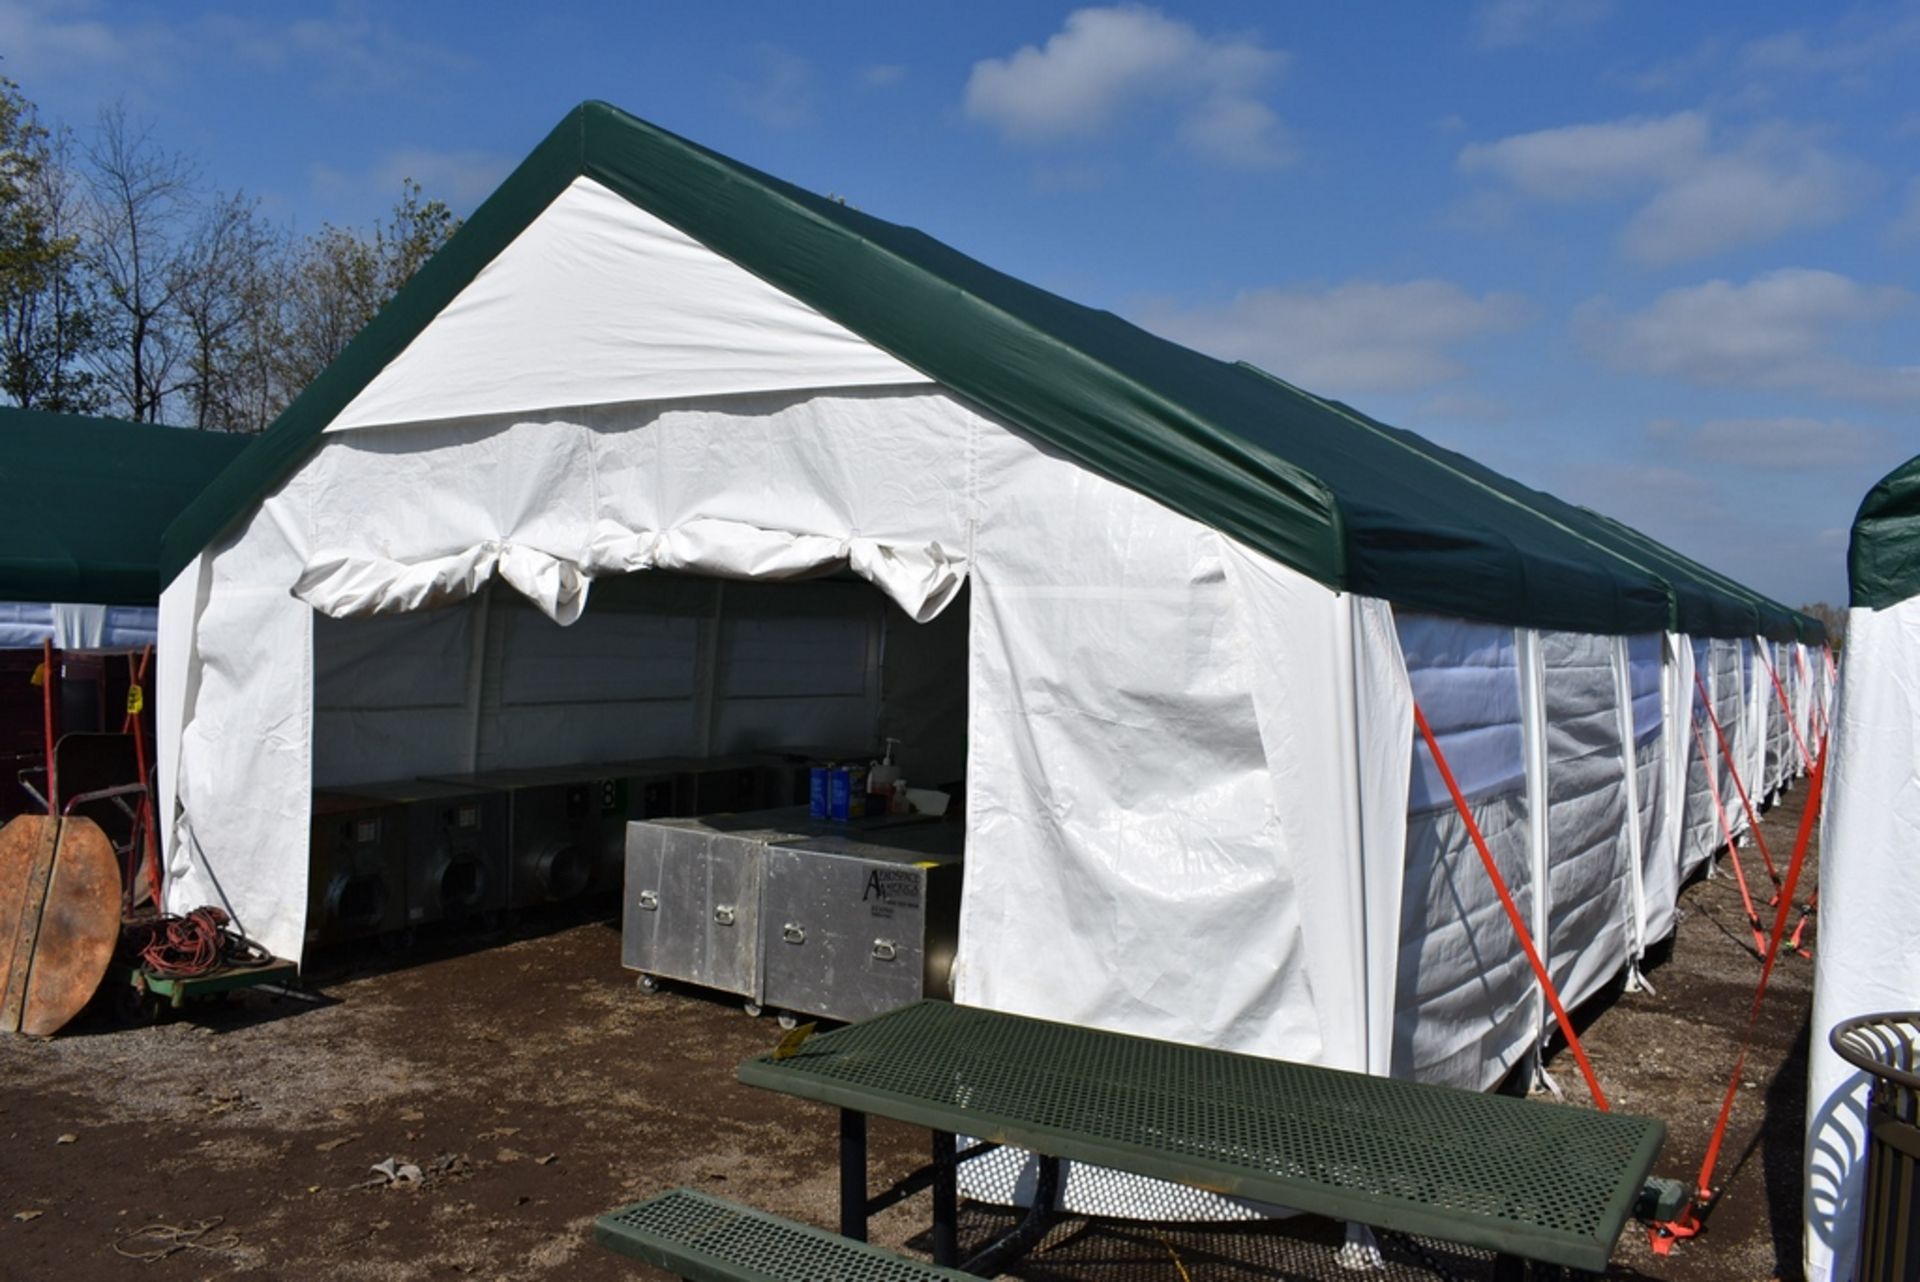 WEATHER FAST 20'X20'X12' EVENT TENTS W/FULL VALANCE FITTED COVER, 8 FOOT PLATES, 2" DIA. STEEL